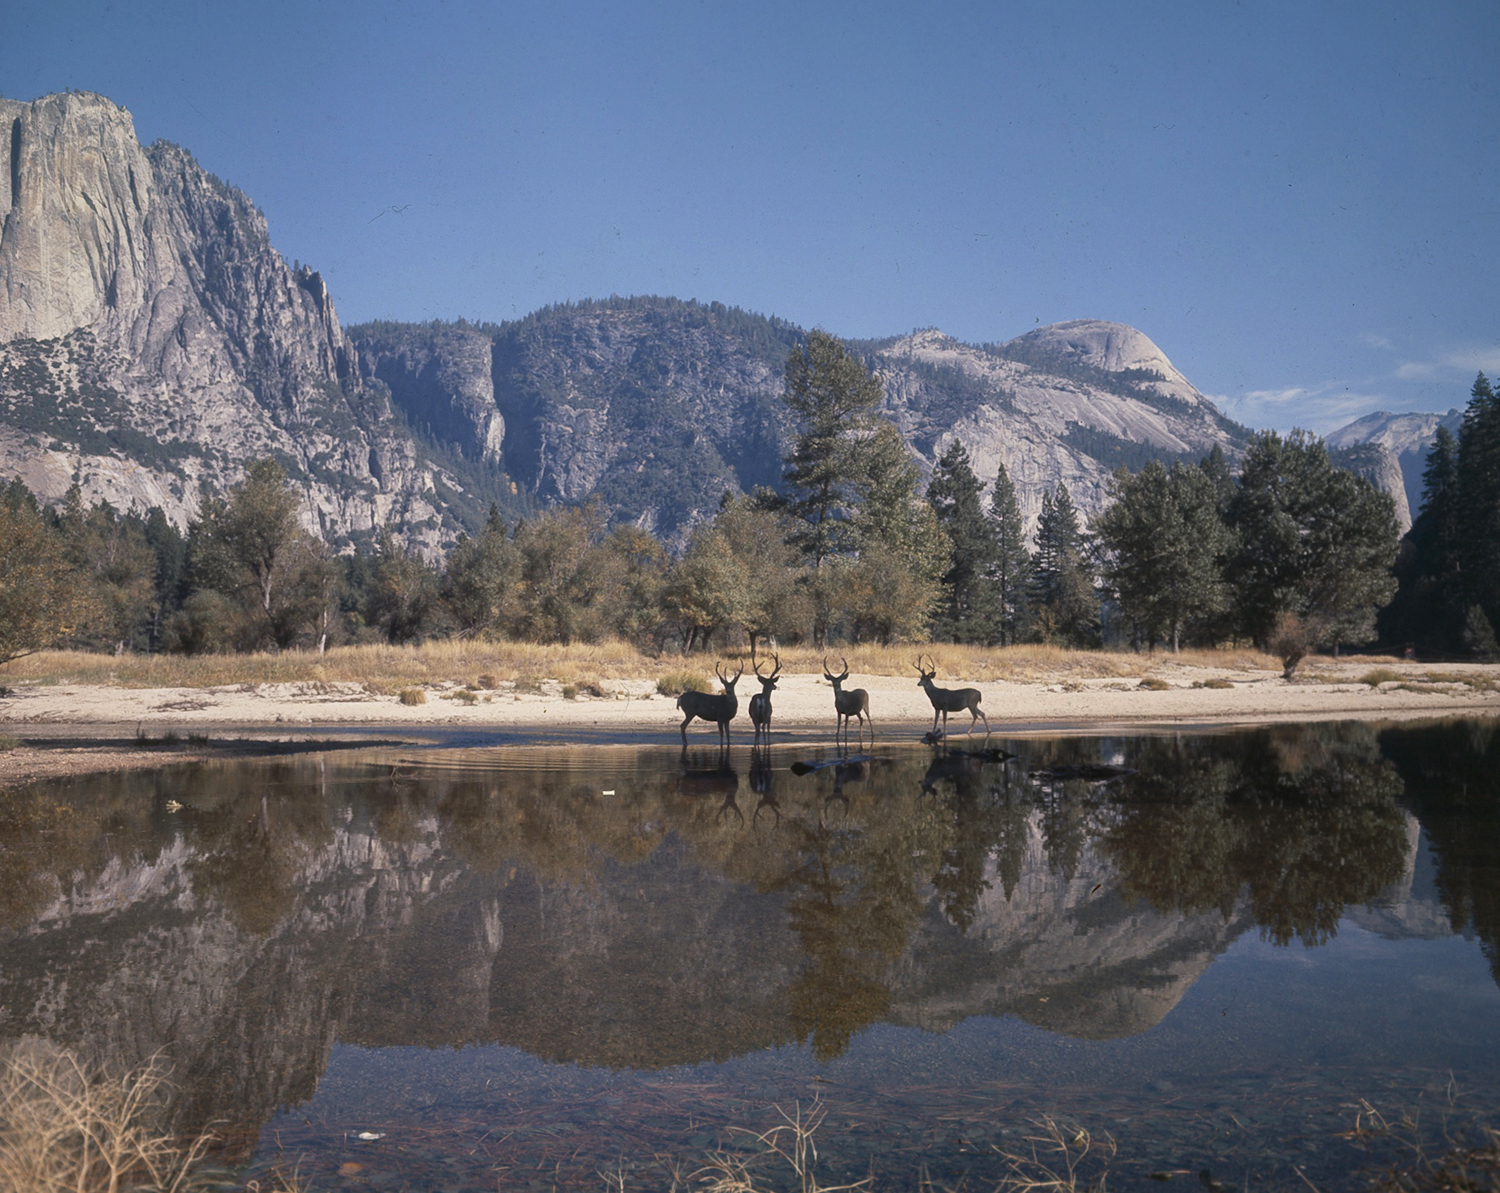 At Yosemite National Park, four bucks gather to drink at the edge of the Merced Rover under the rock formations of El Capitan (far left) and North Dome (center, right) which rise above the unspoiled wilderness.